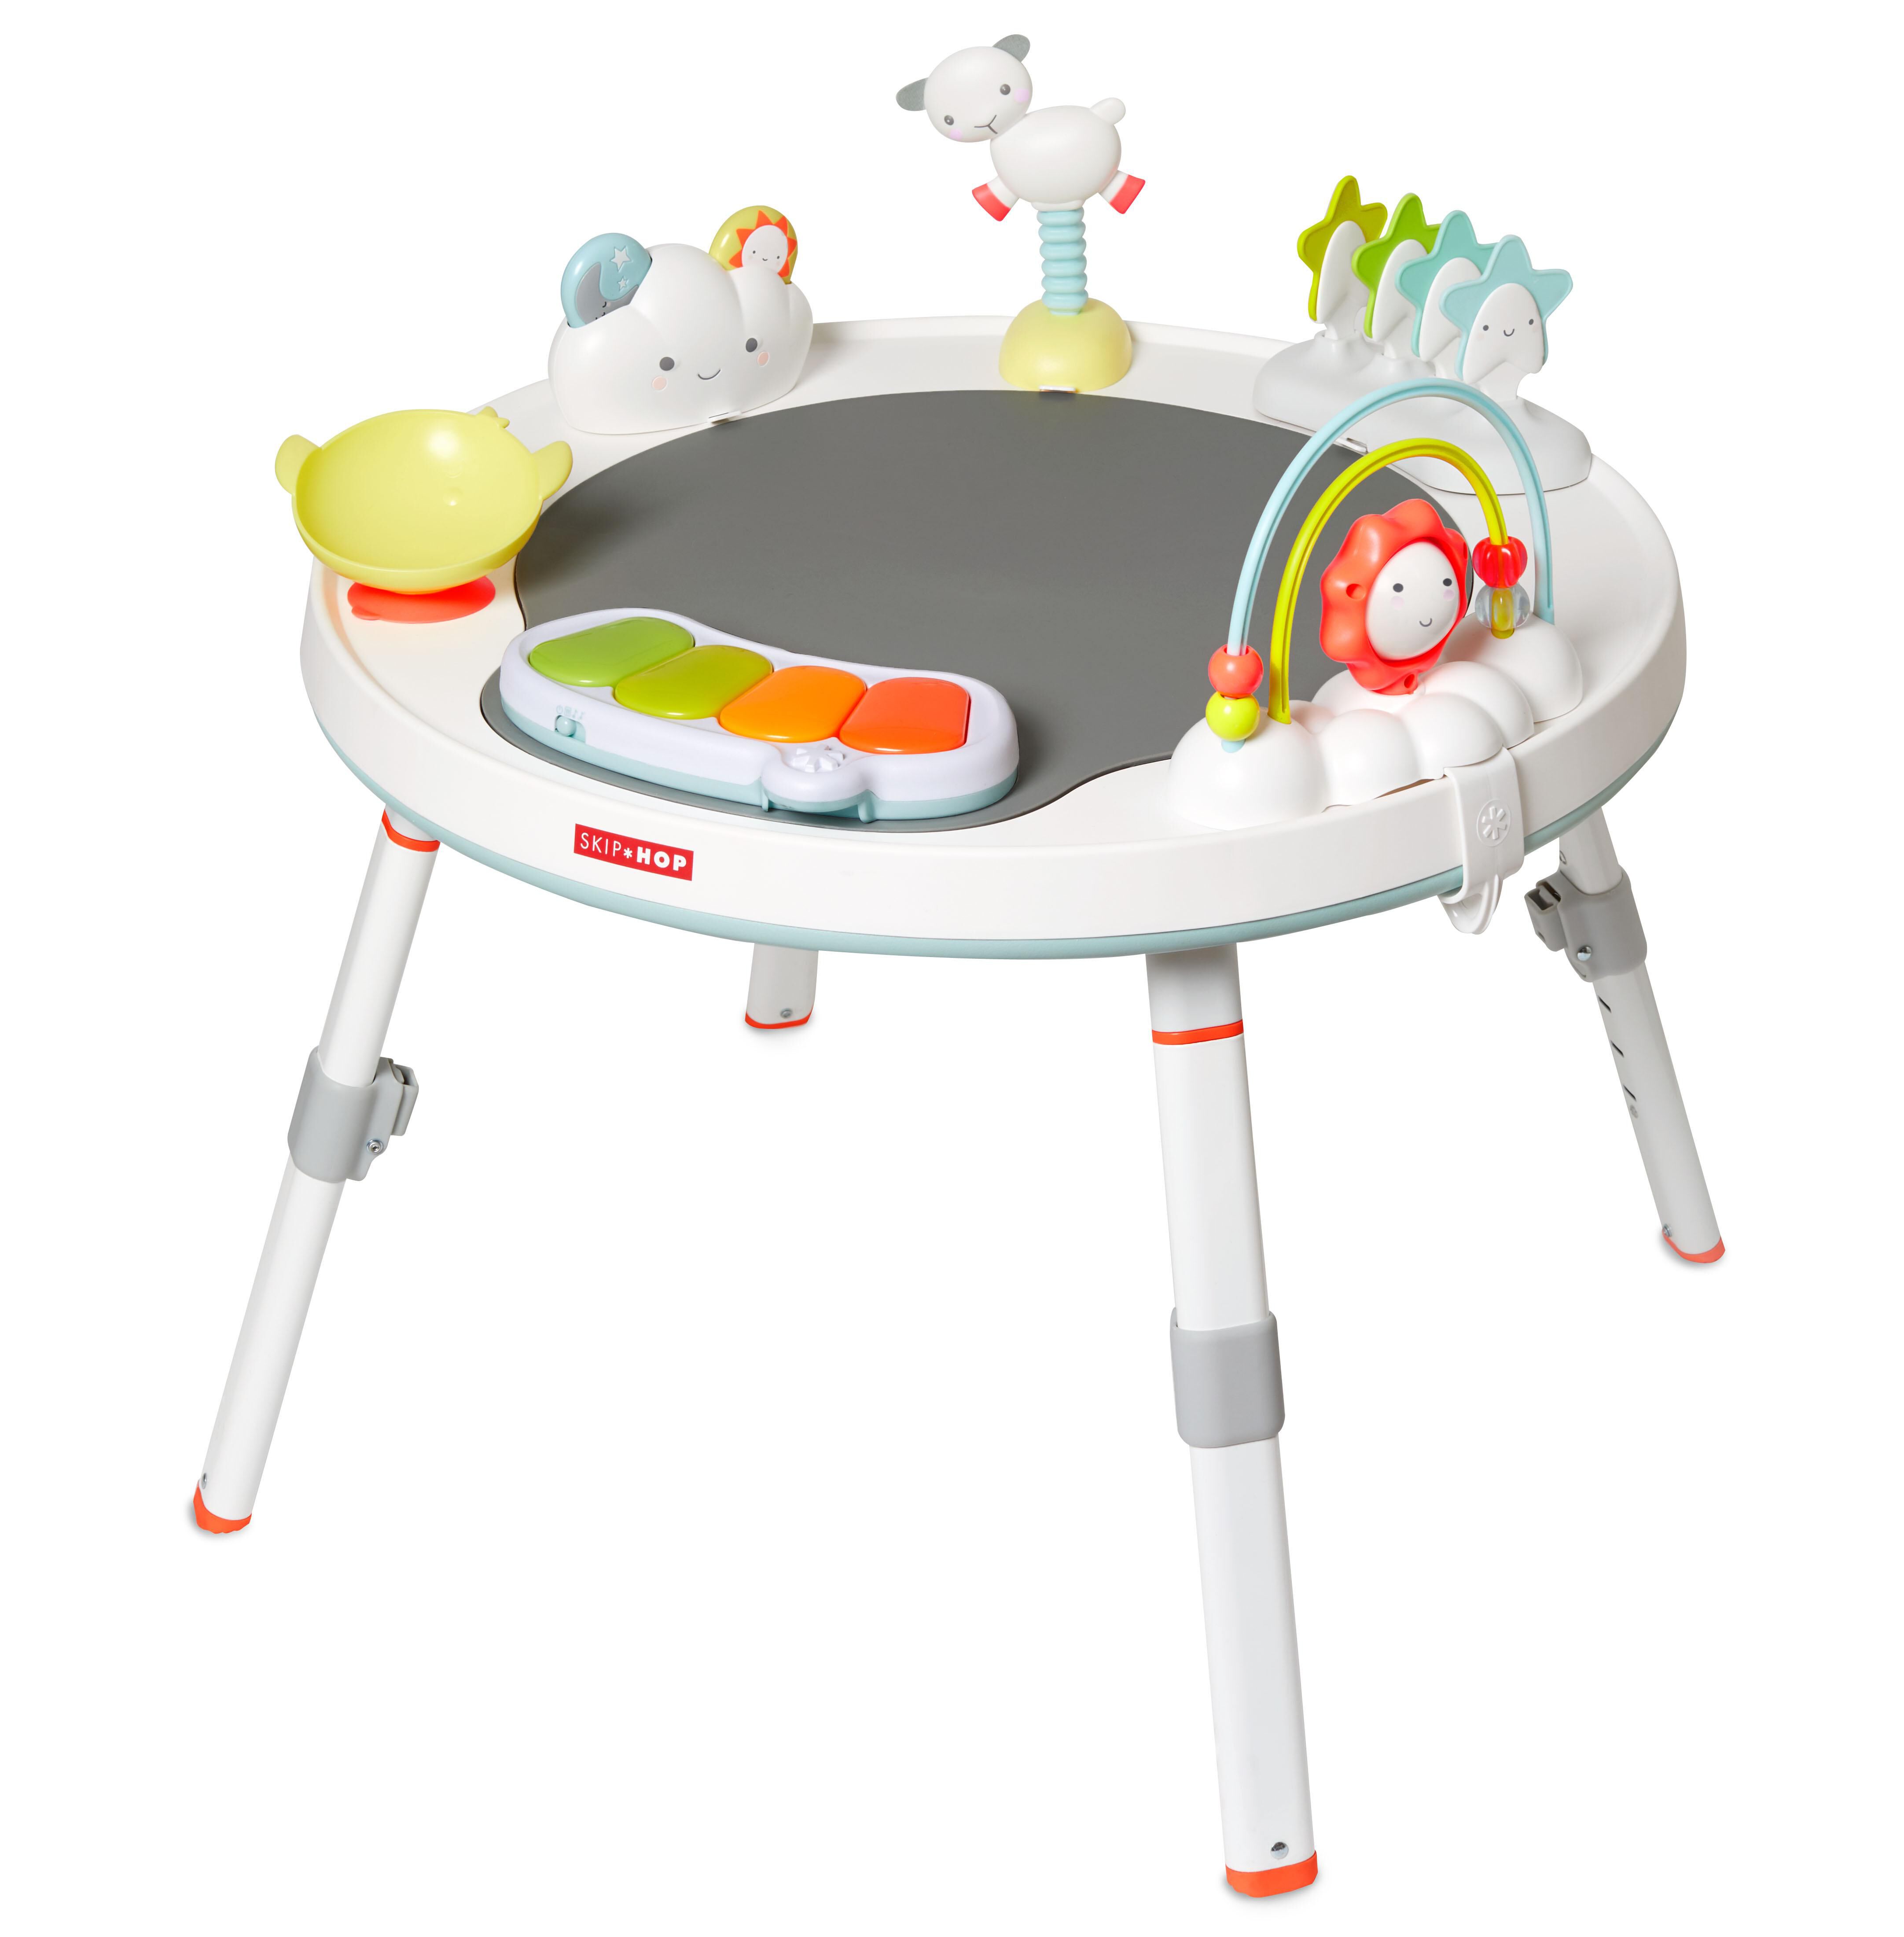 silver lining cloud baby's view activity center